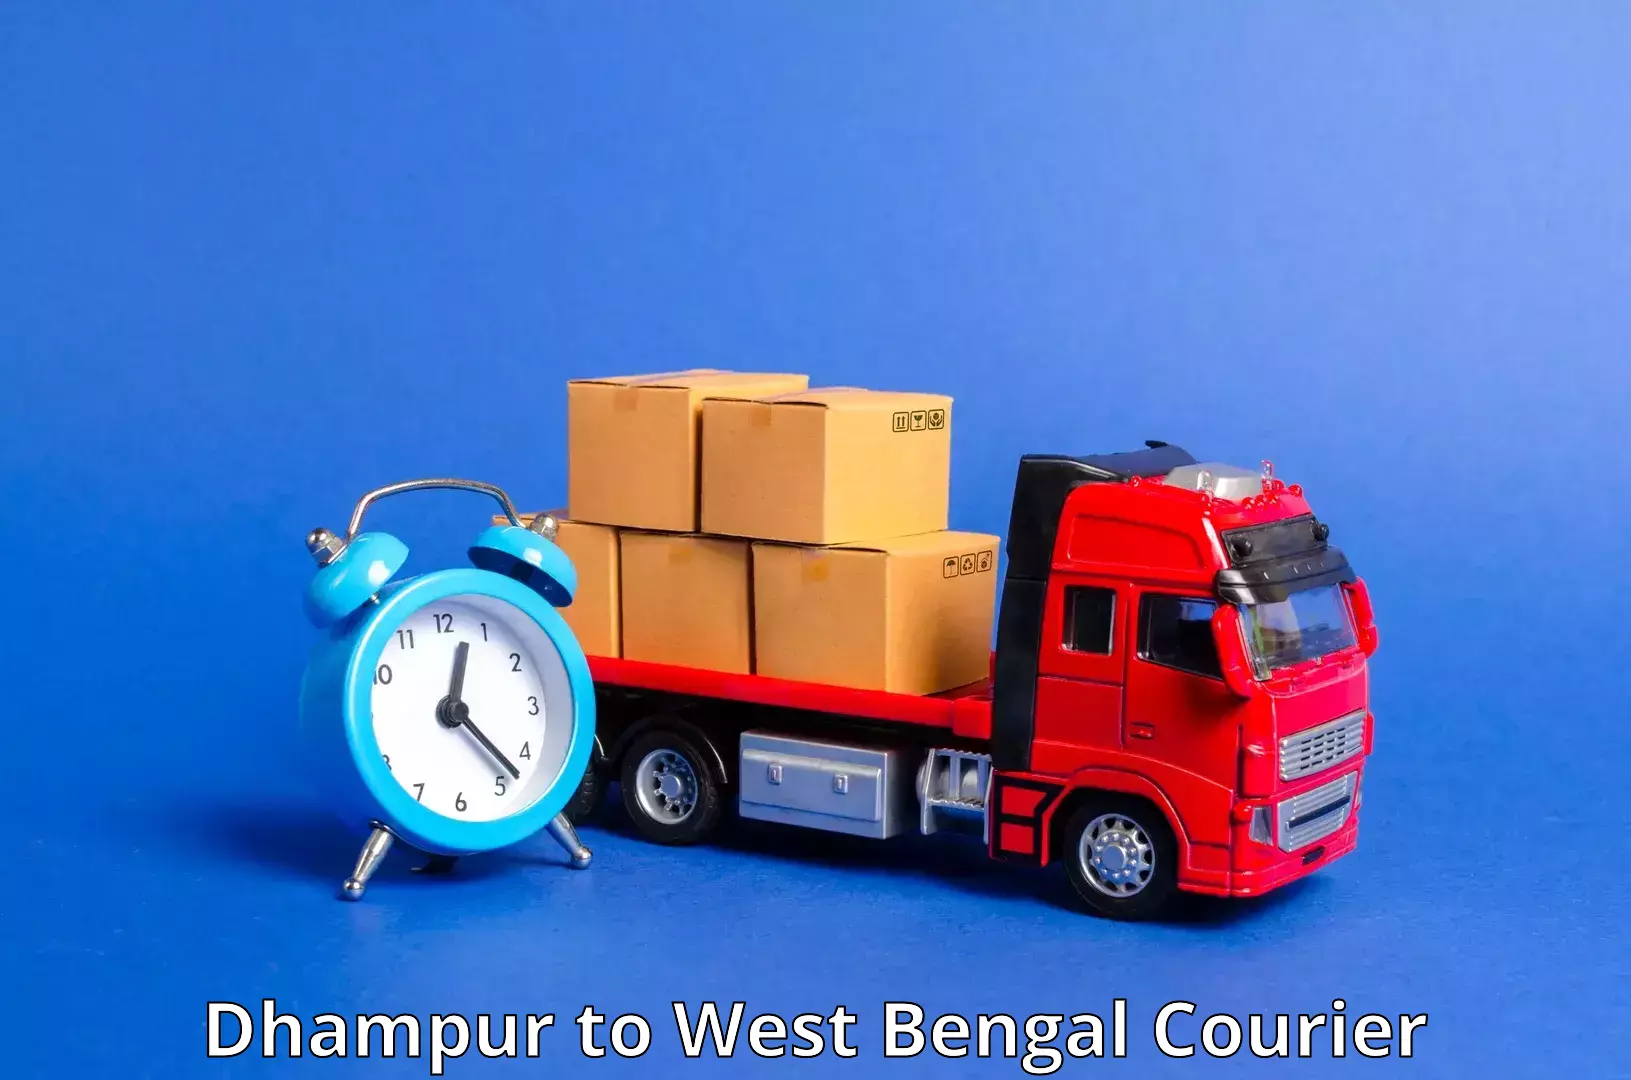 Multi-national courier services Dhampur to Alipore